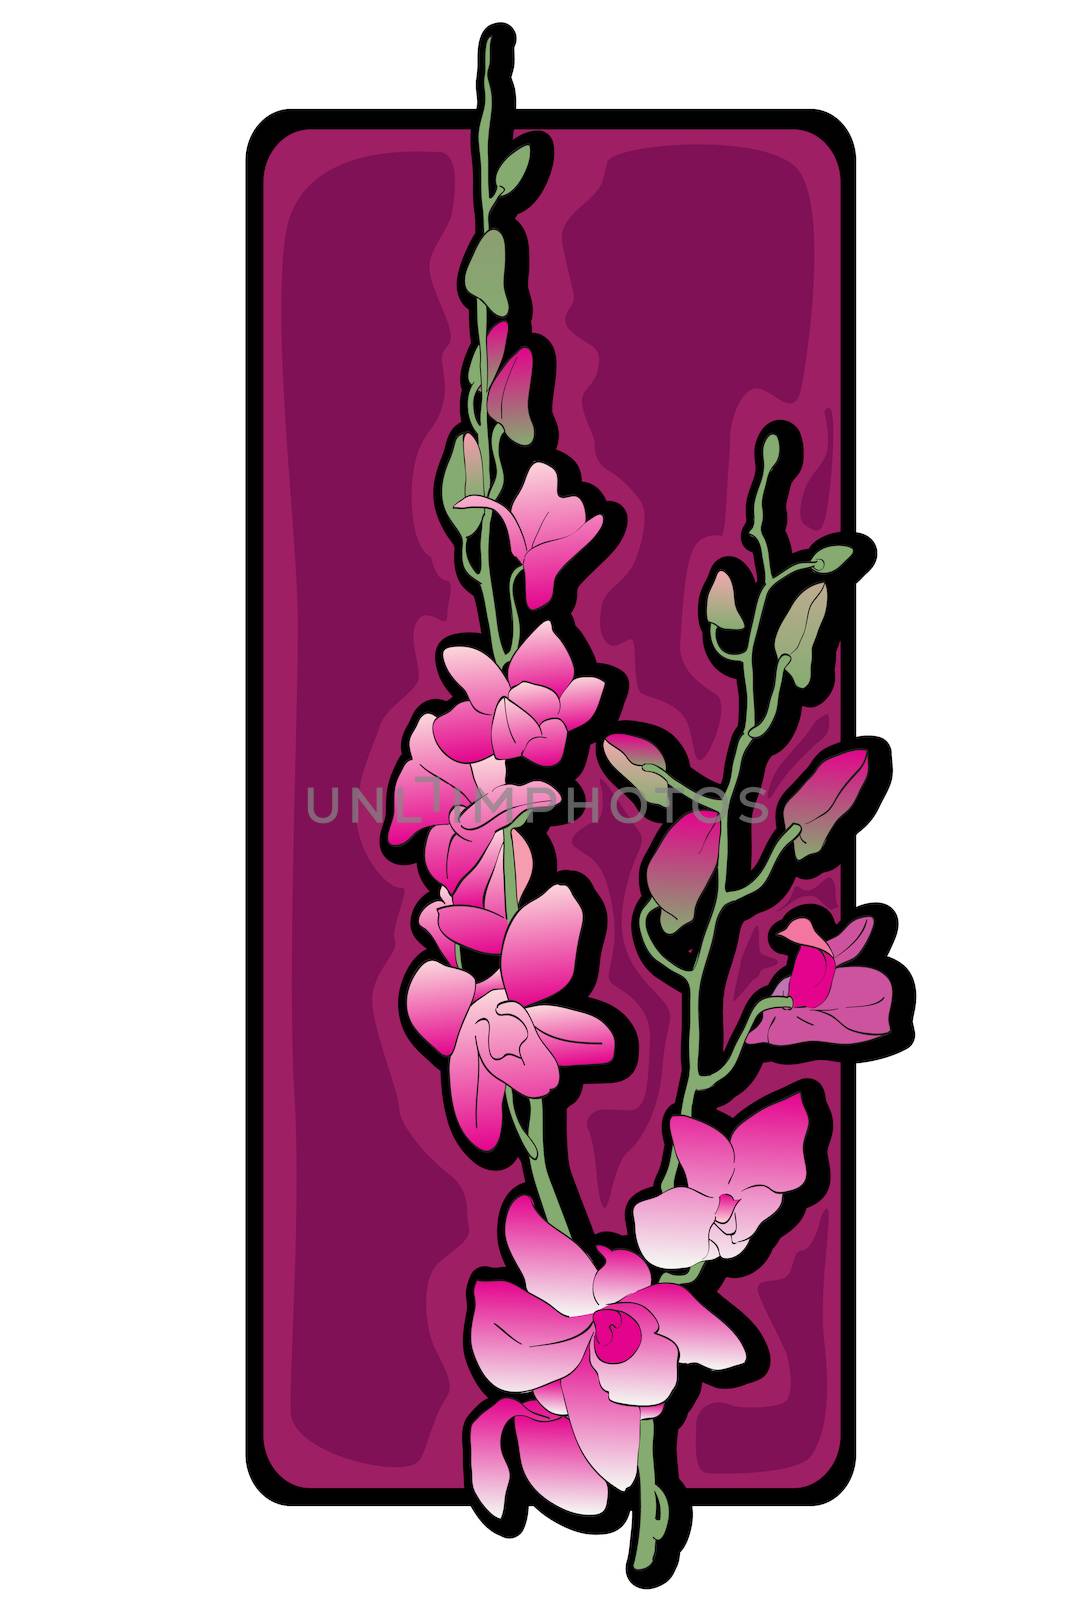 Long orchids clip art over purple label isolated on white